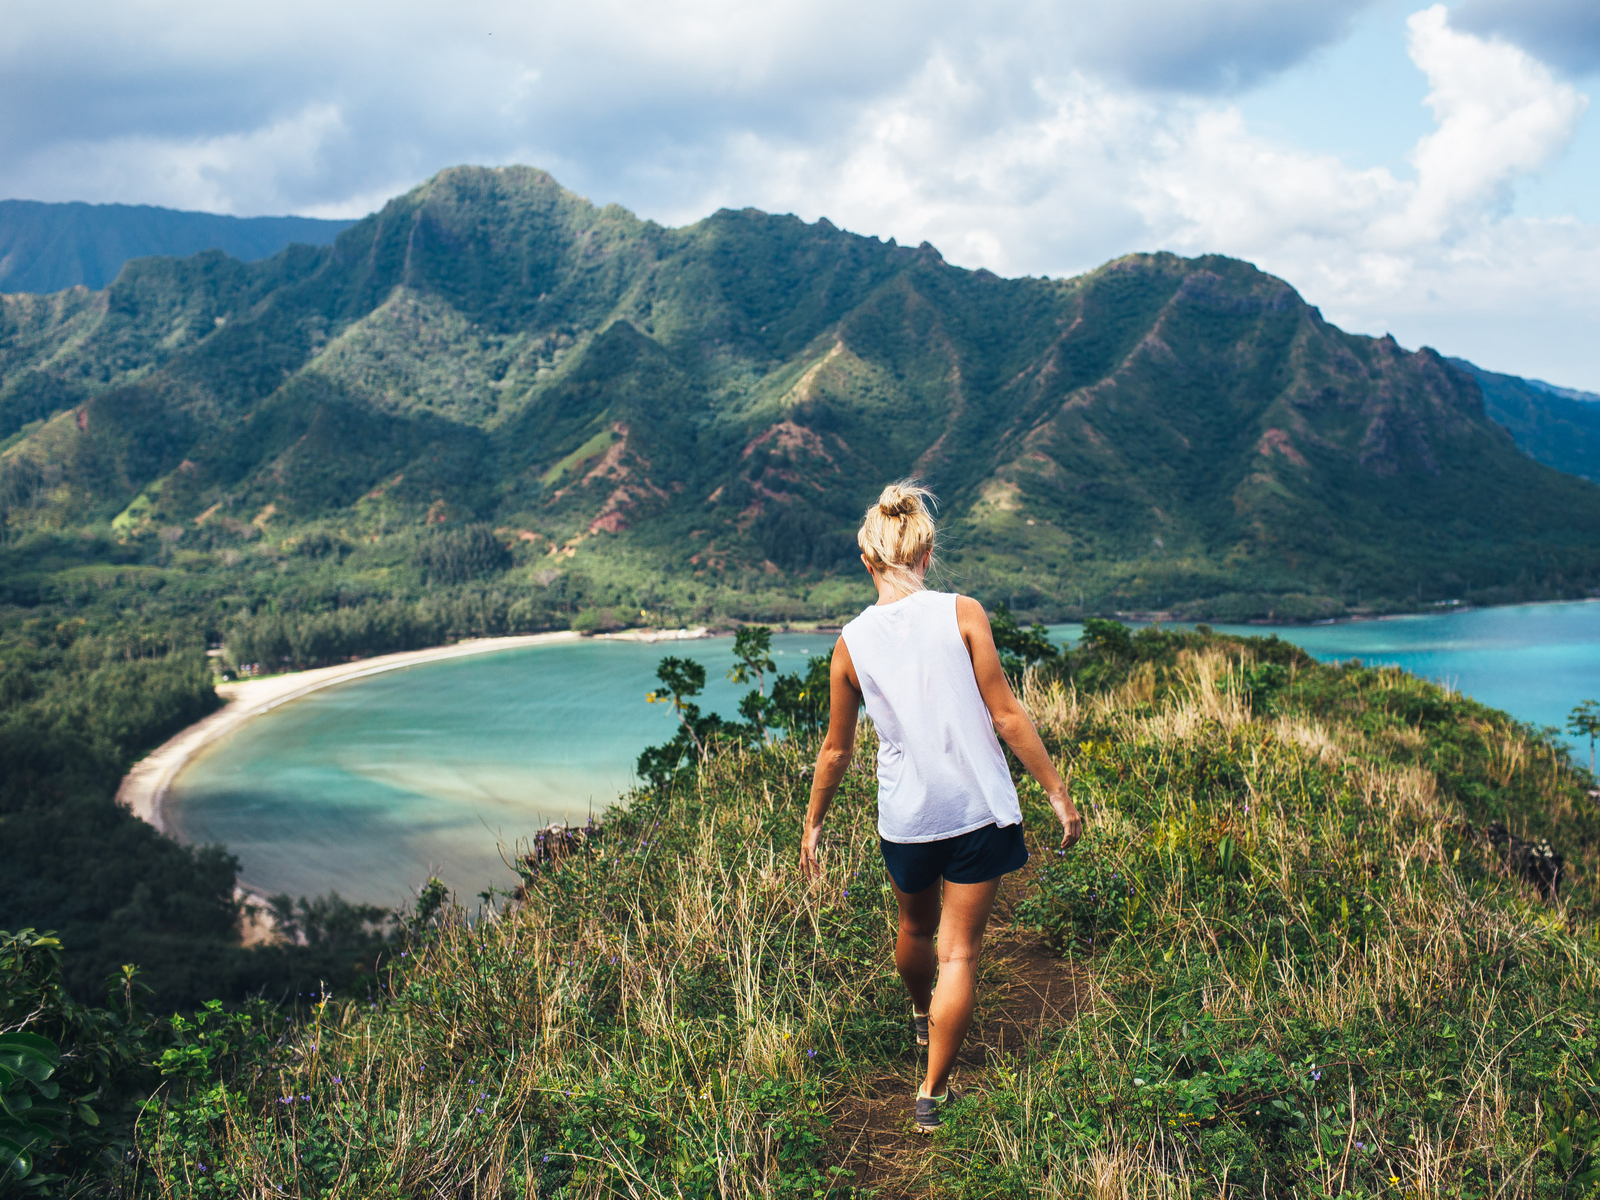 For a post titled Is Hawaii Safe to Visit, a single blonde woman walking on a path overlooking the Na Pali Coast